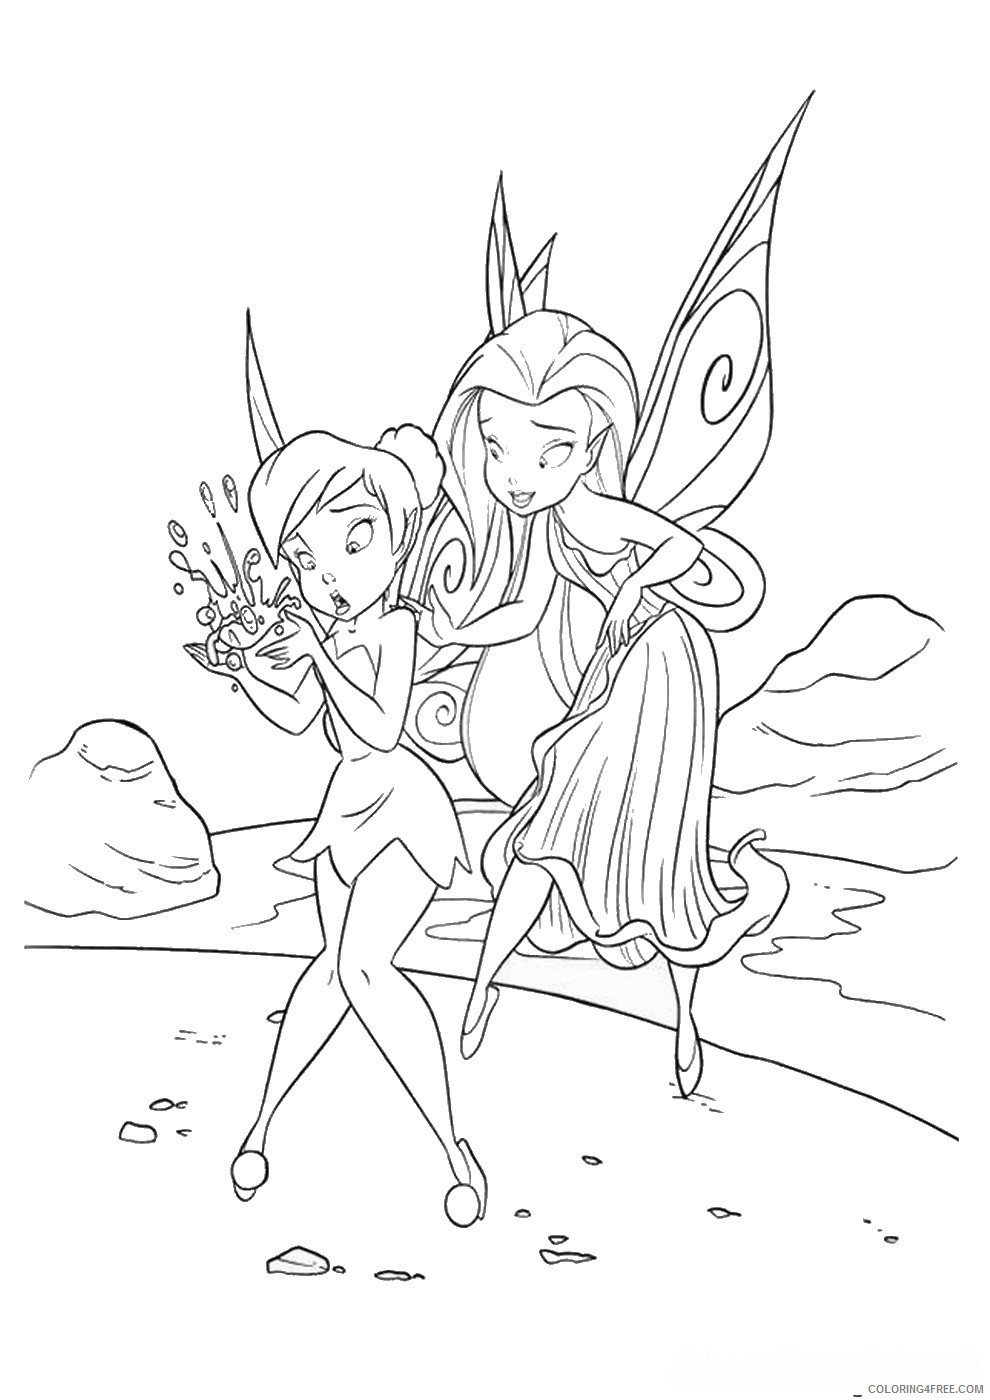 Tinker Bell Coloring Pages Cartoons tinkerbell_cl_07 Printable 2020 6614 Coloring4free